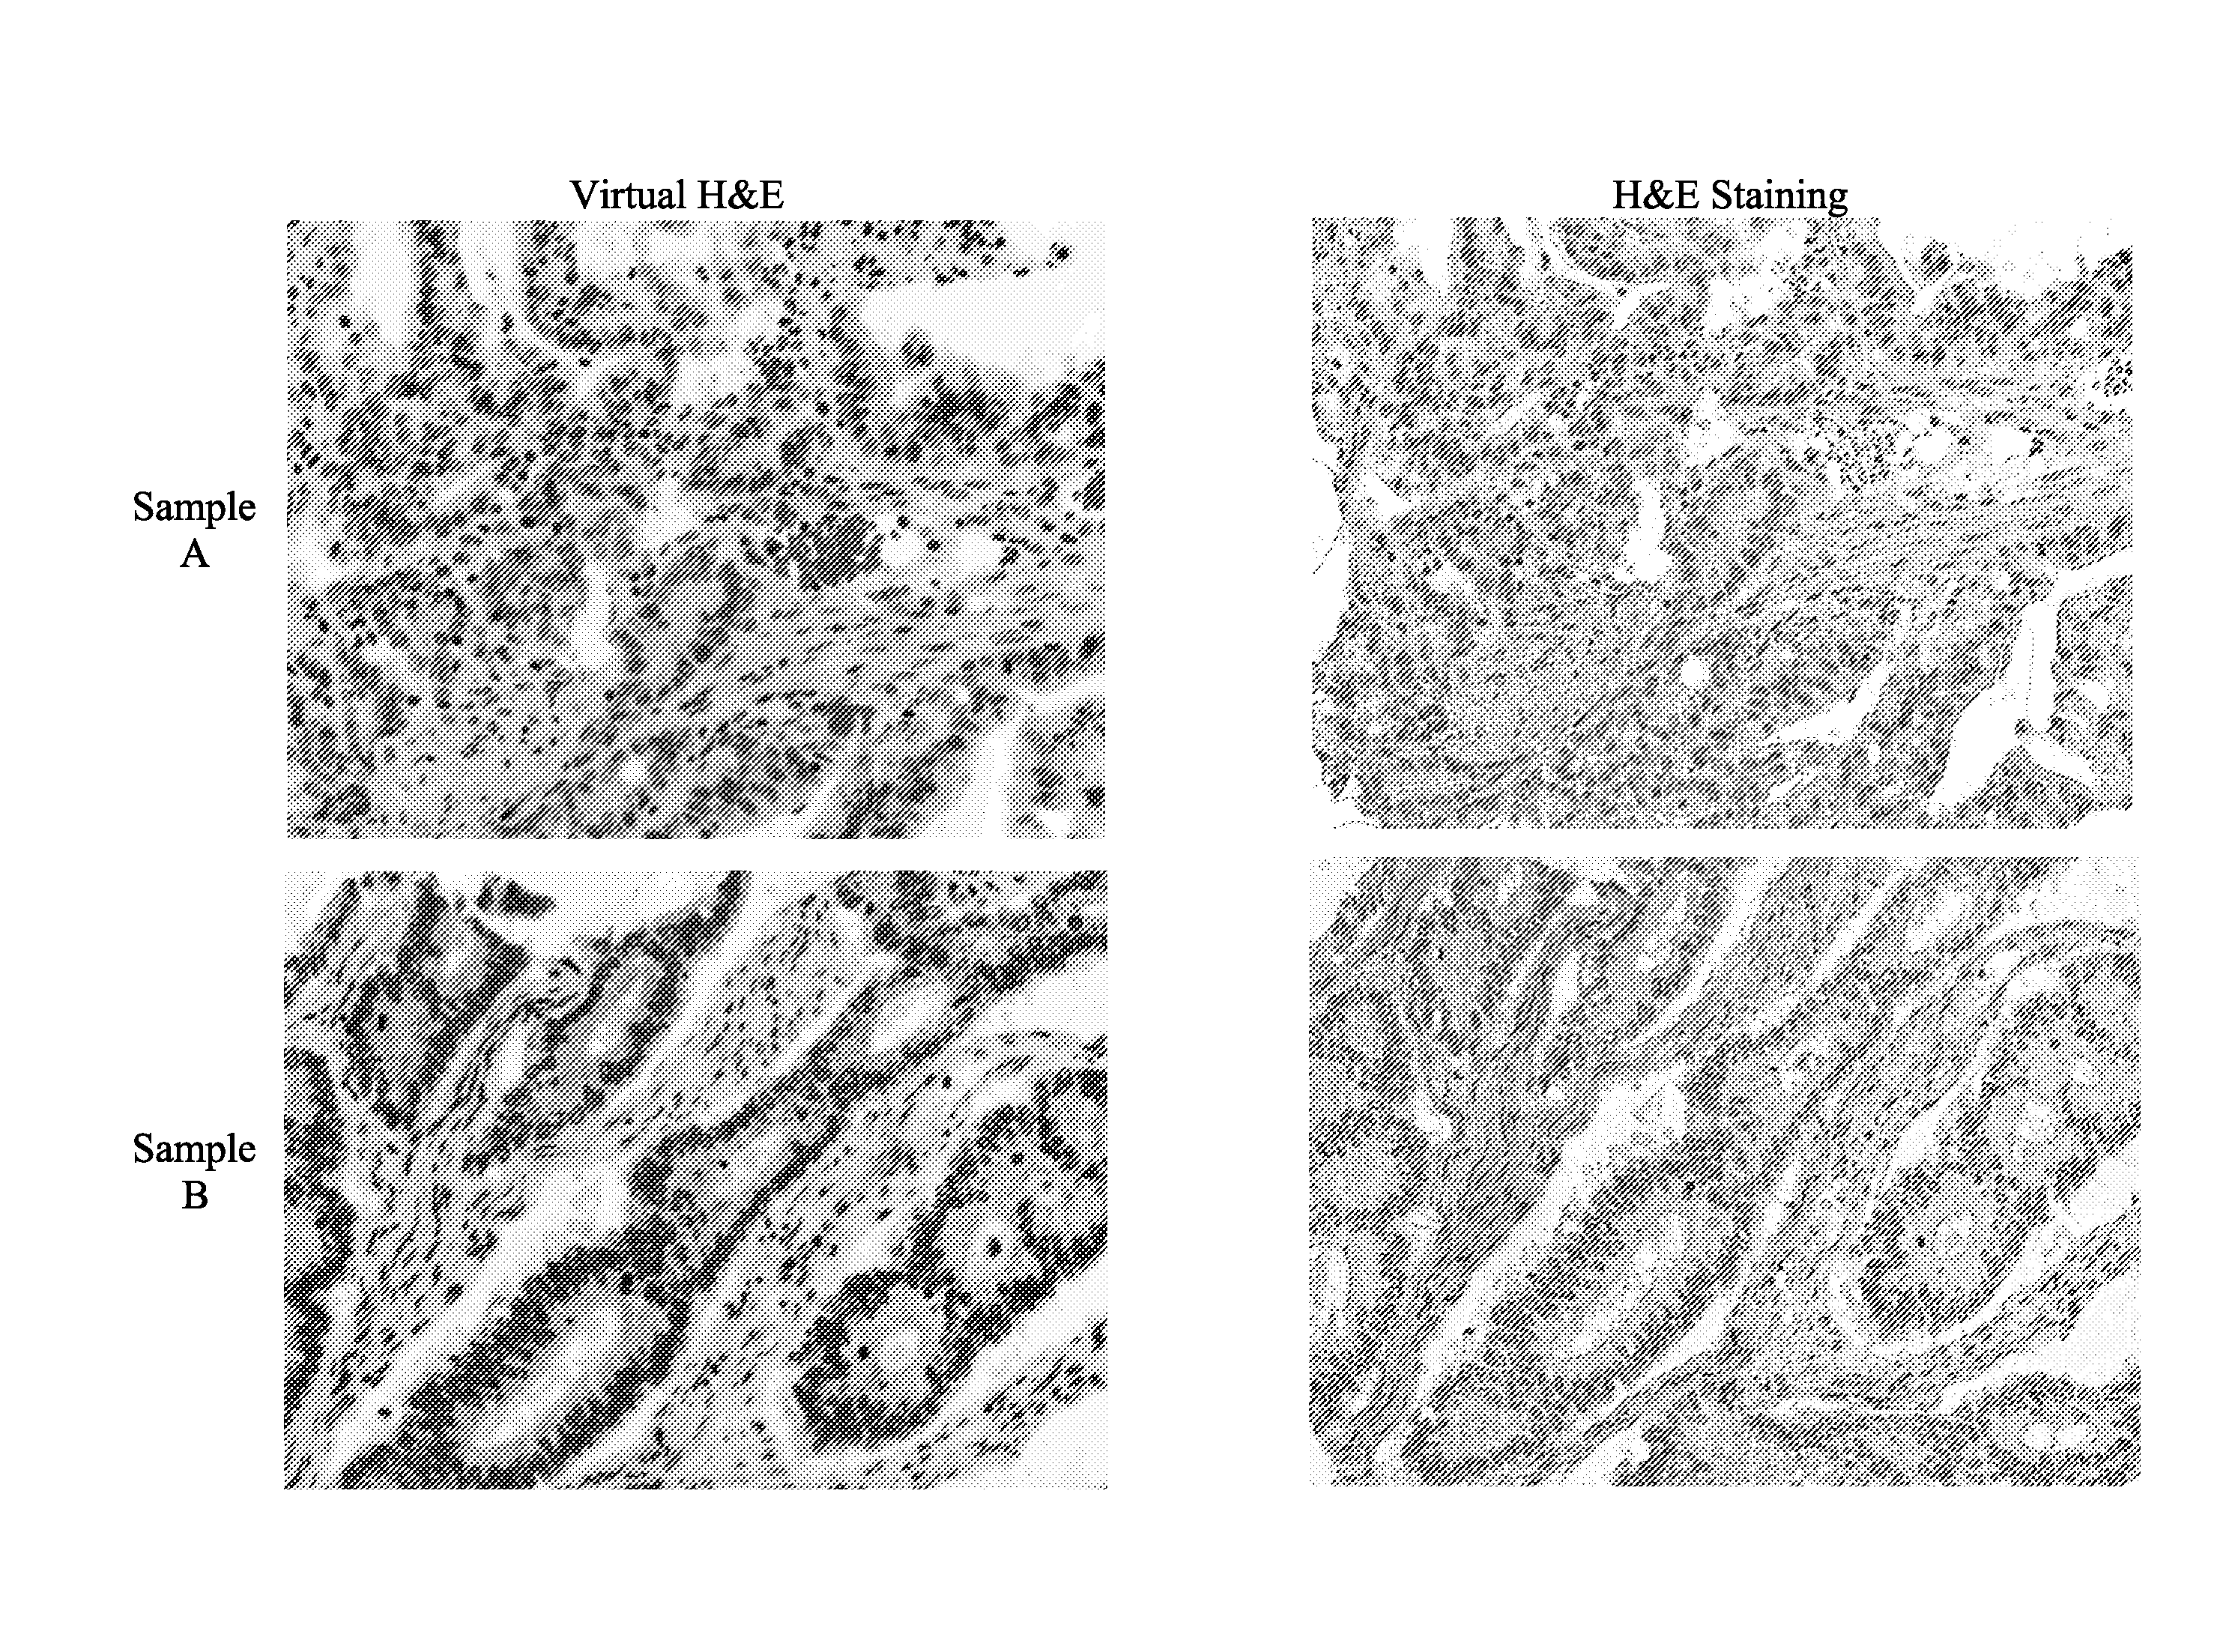 System and methods for generating a brightfield image using fluorescent images